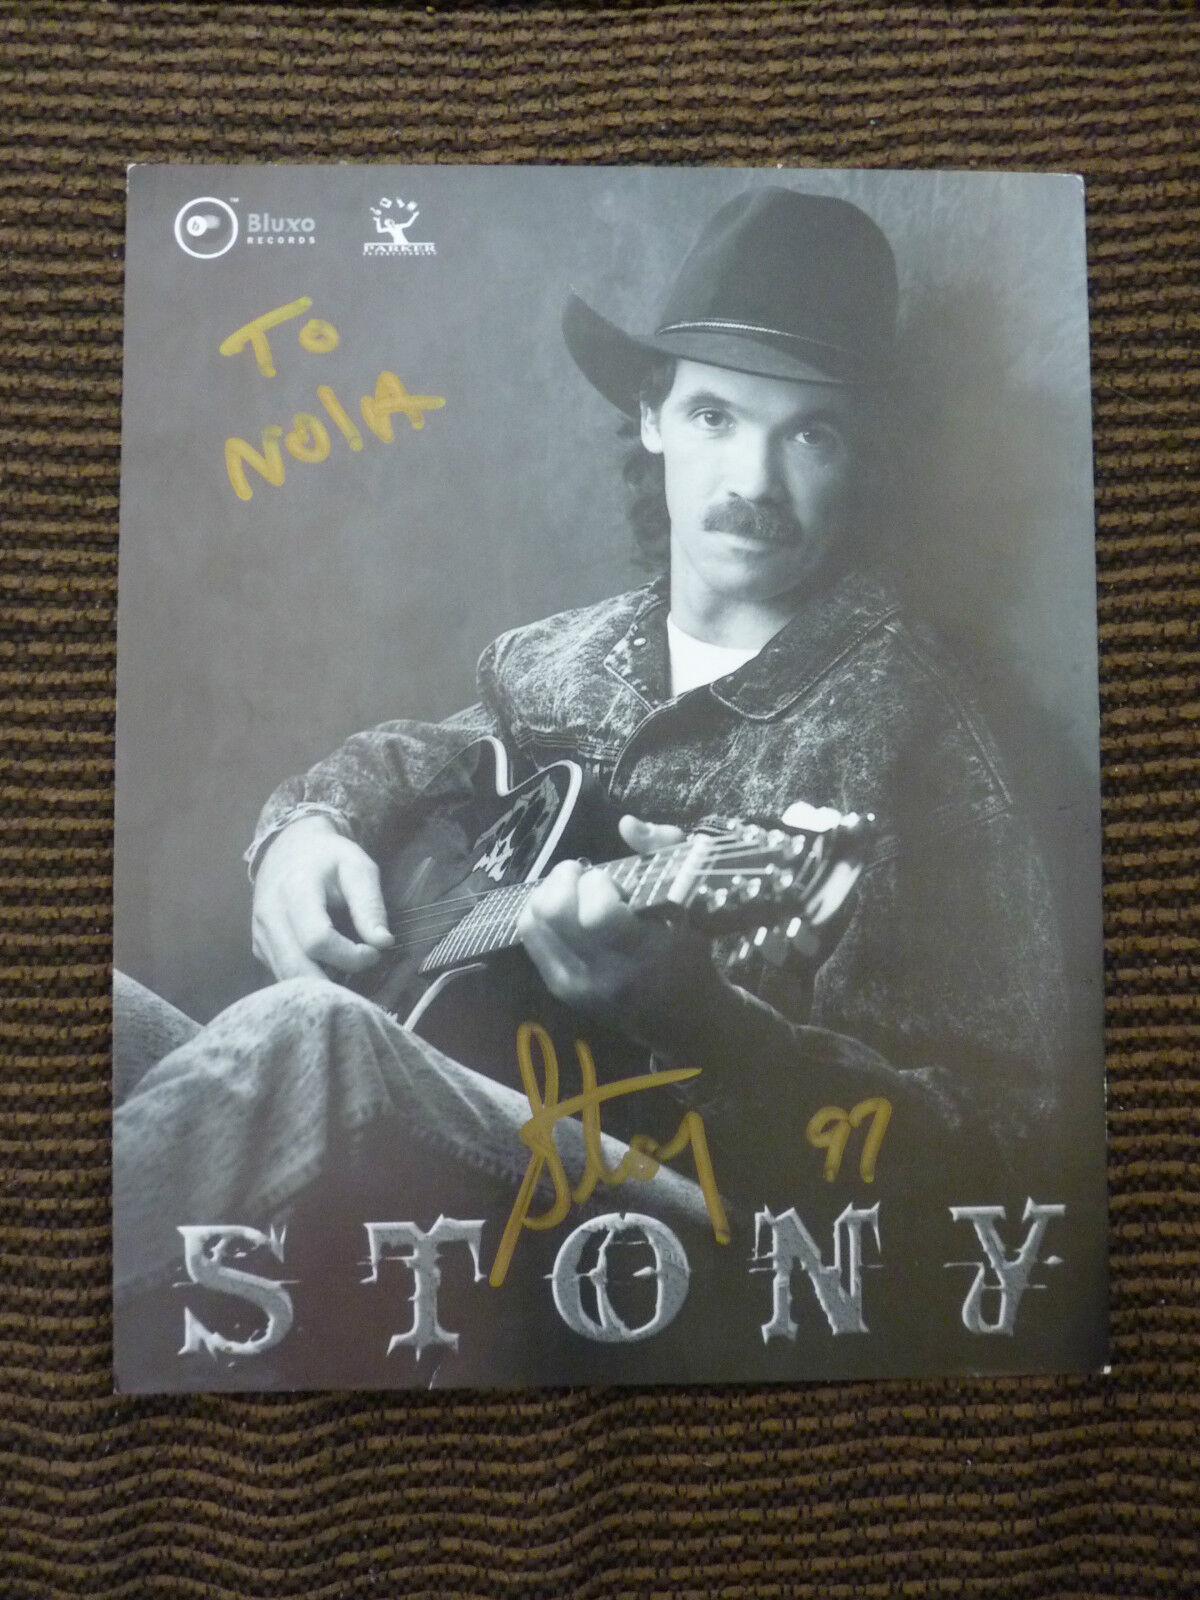 Stony Country Music 1997 Signed Autograph Promo Photo Poster painting 8x10 personalized